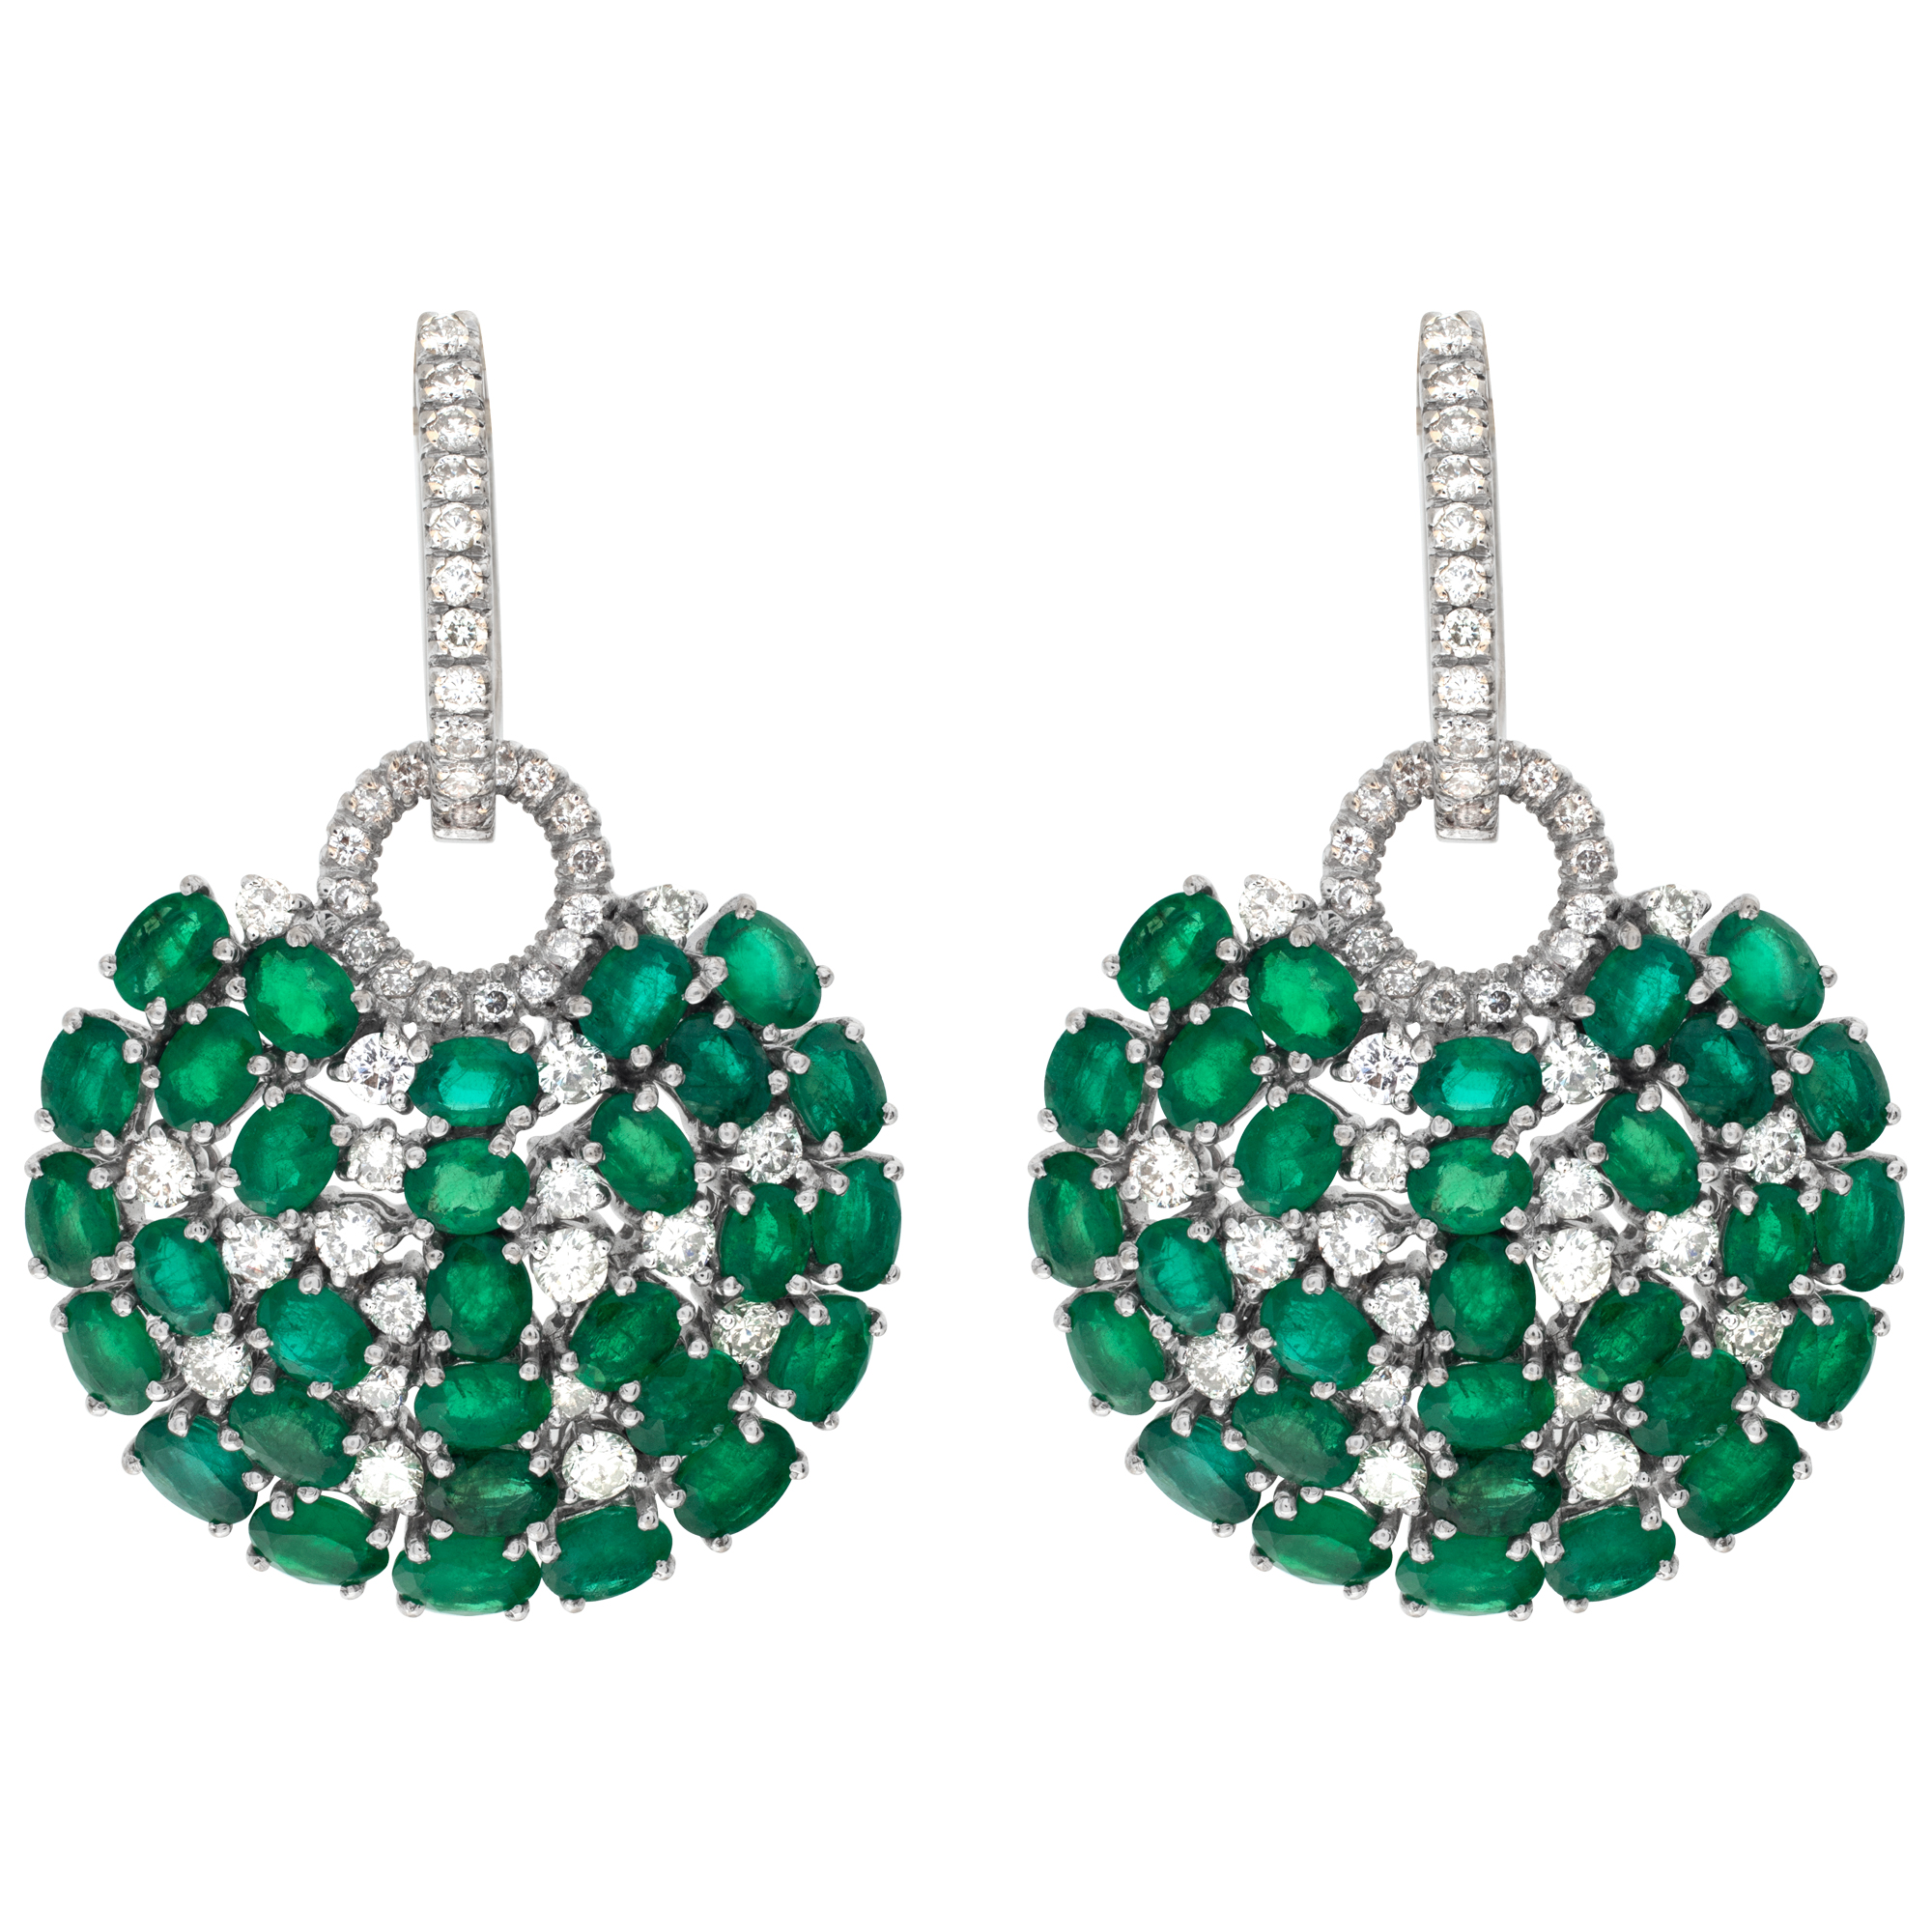 Lovely 18k white gold diamond and emerald drop earrings image 1